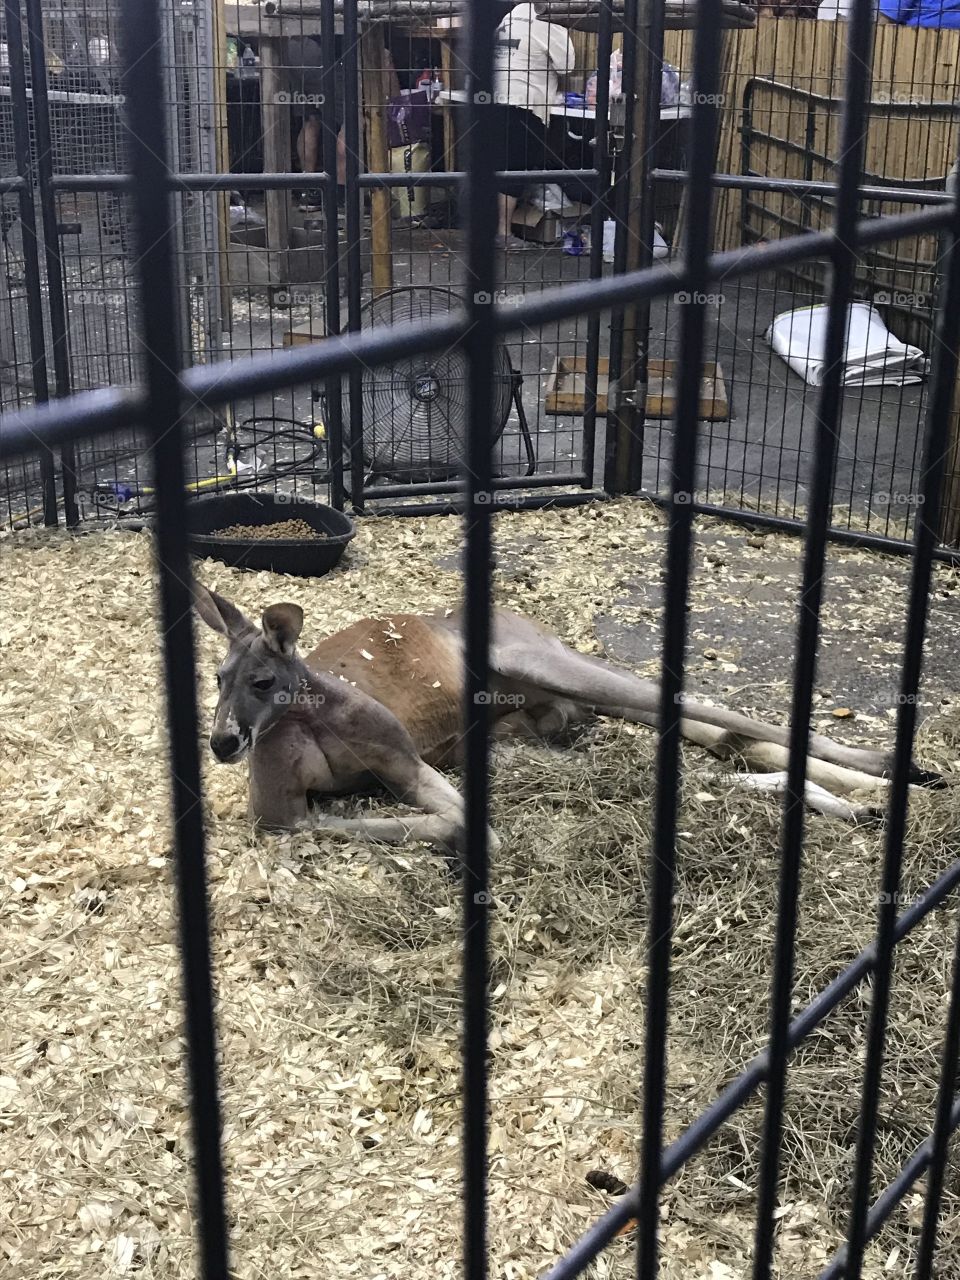 Kangaroo at the Wilson county fair, it’s late at night so he is quite exhausted 